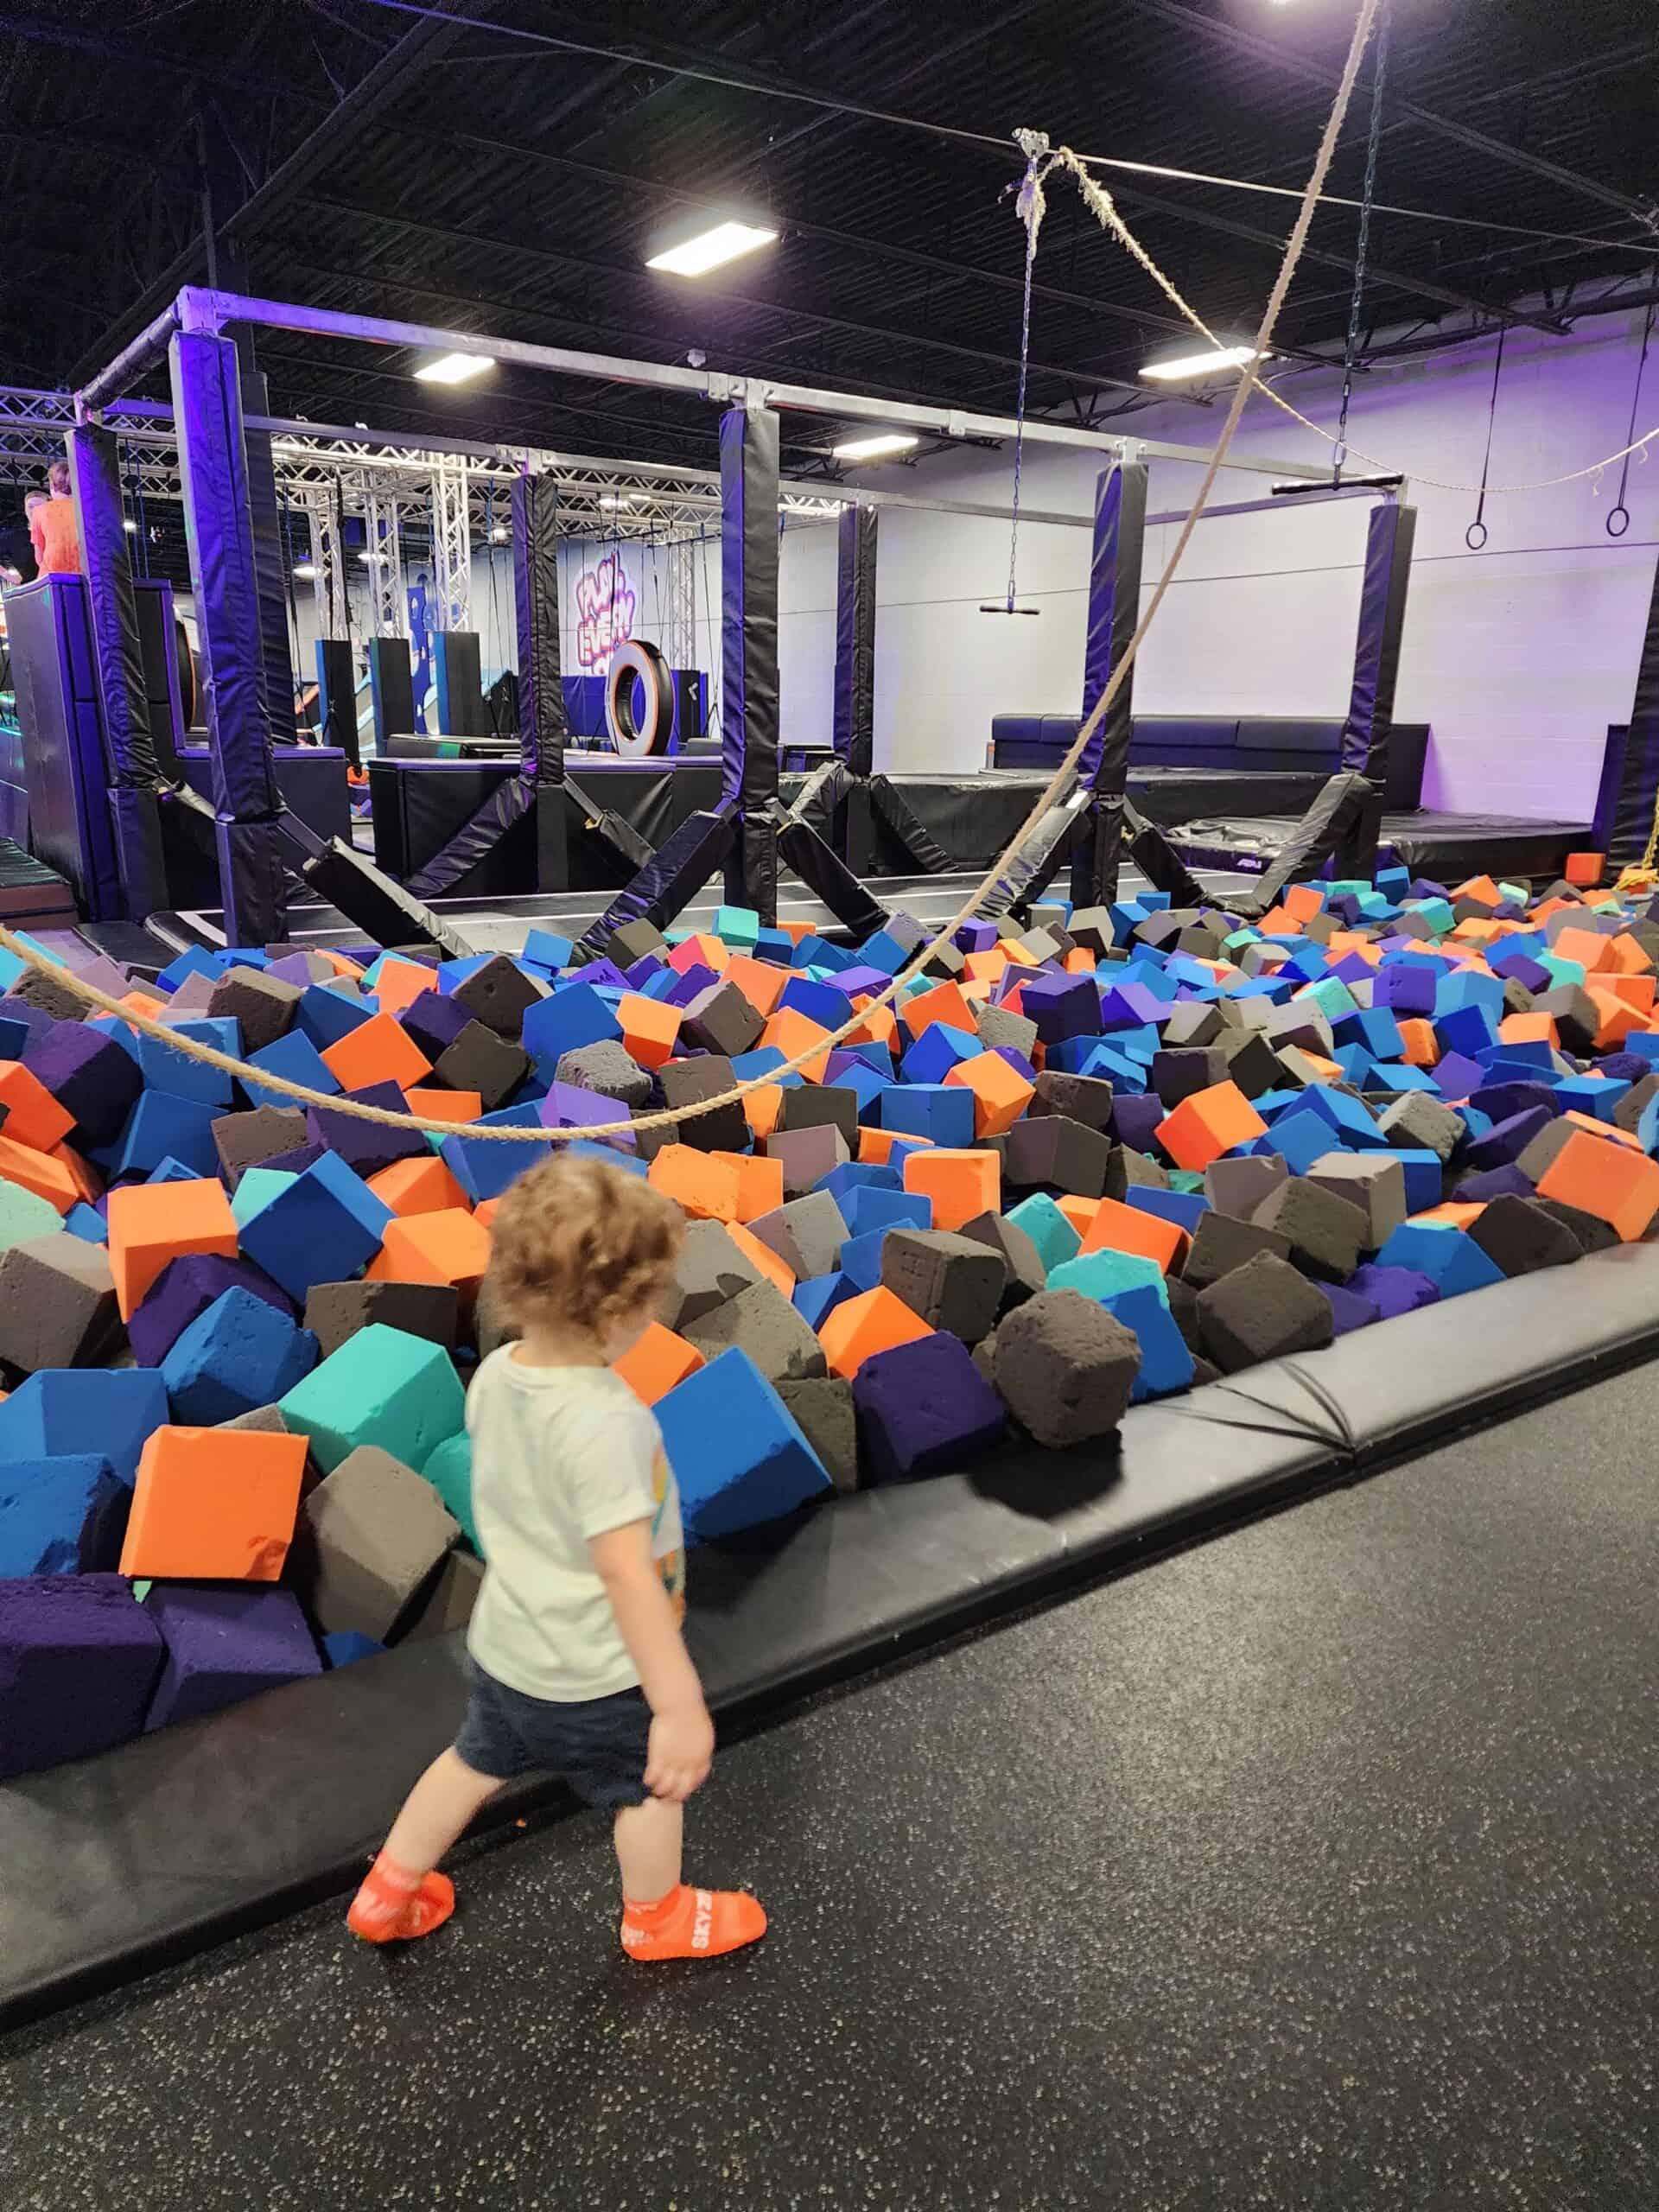 A young child walks past a foam pit filled with colorful foam cubes in an indoor adventure park. The park features ropes, climbing structures, and various obstacles, providing a vibrant and engaging space for active play.